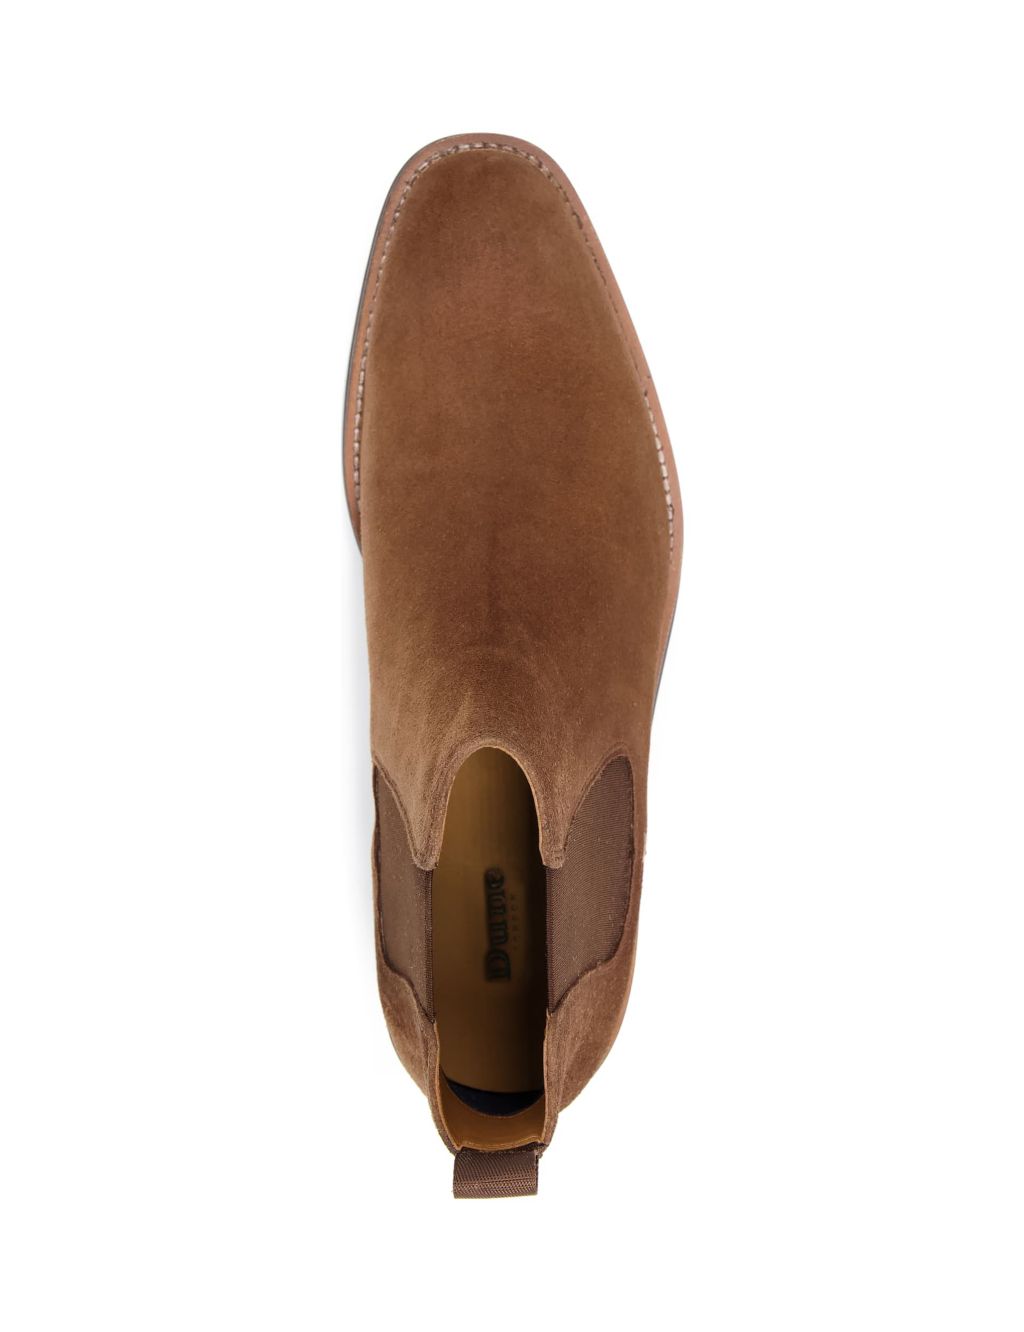 Suede Chelsea Boots image 3